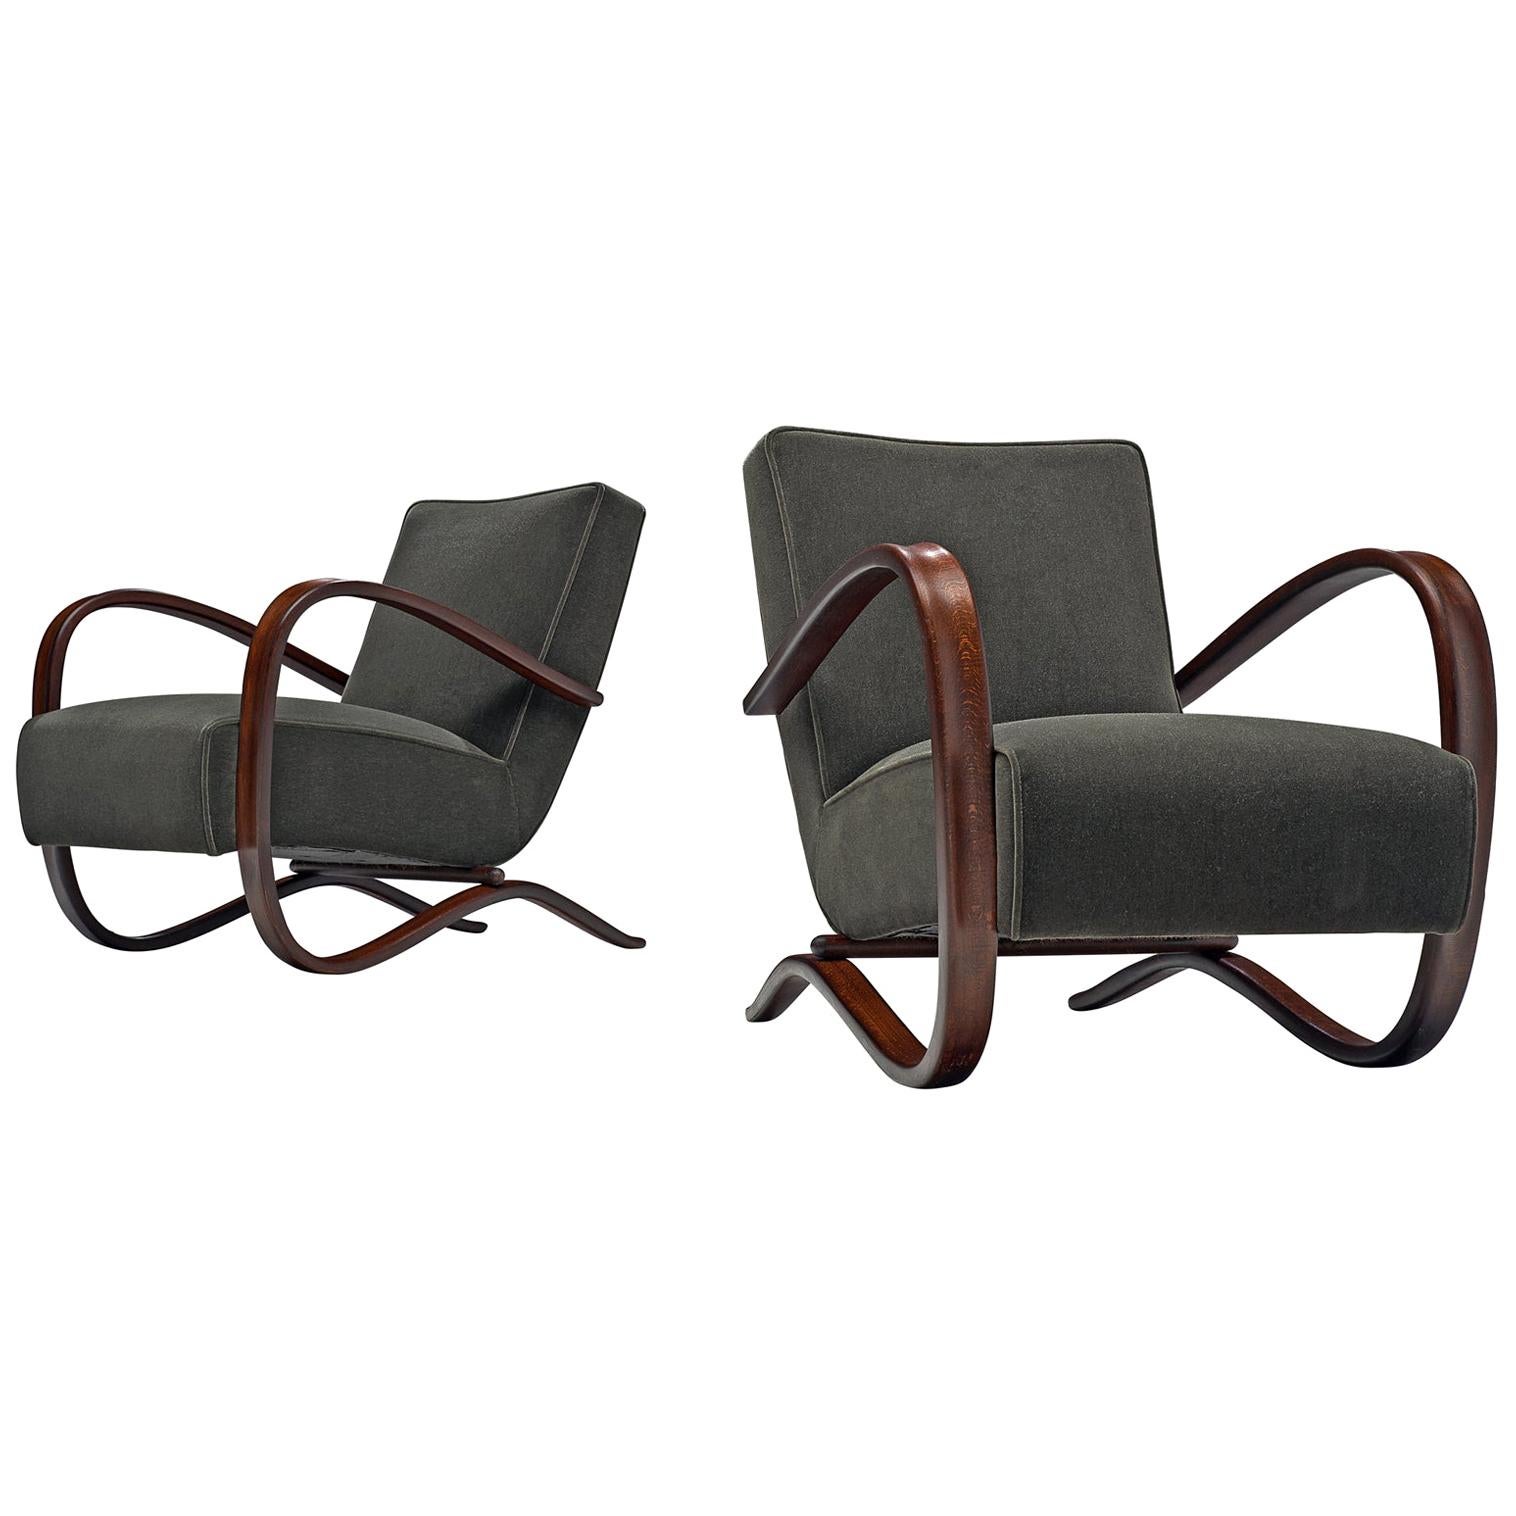 Jindrich Halabala Lounge Chairs Customizable in Mohair Upholstery